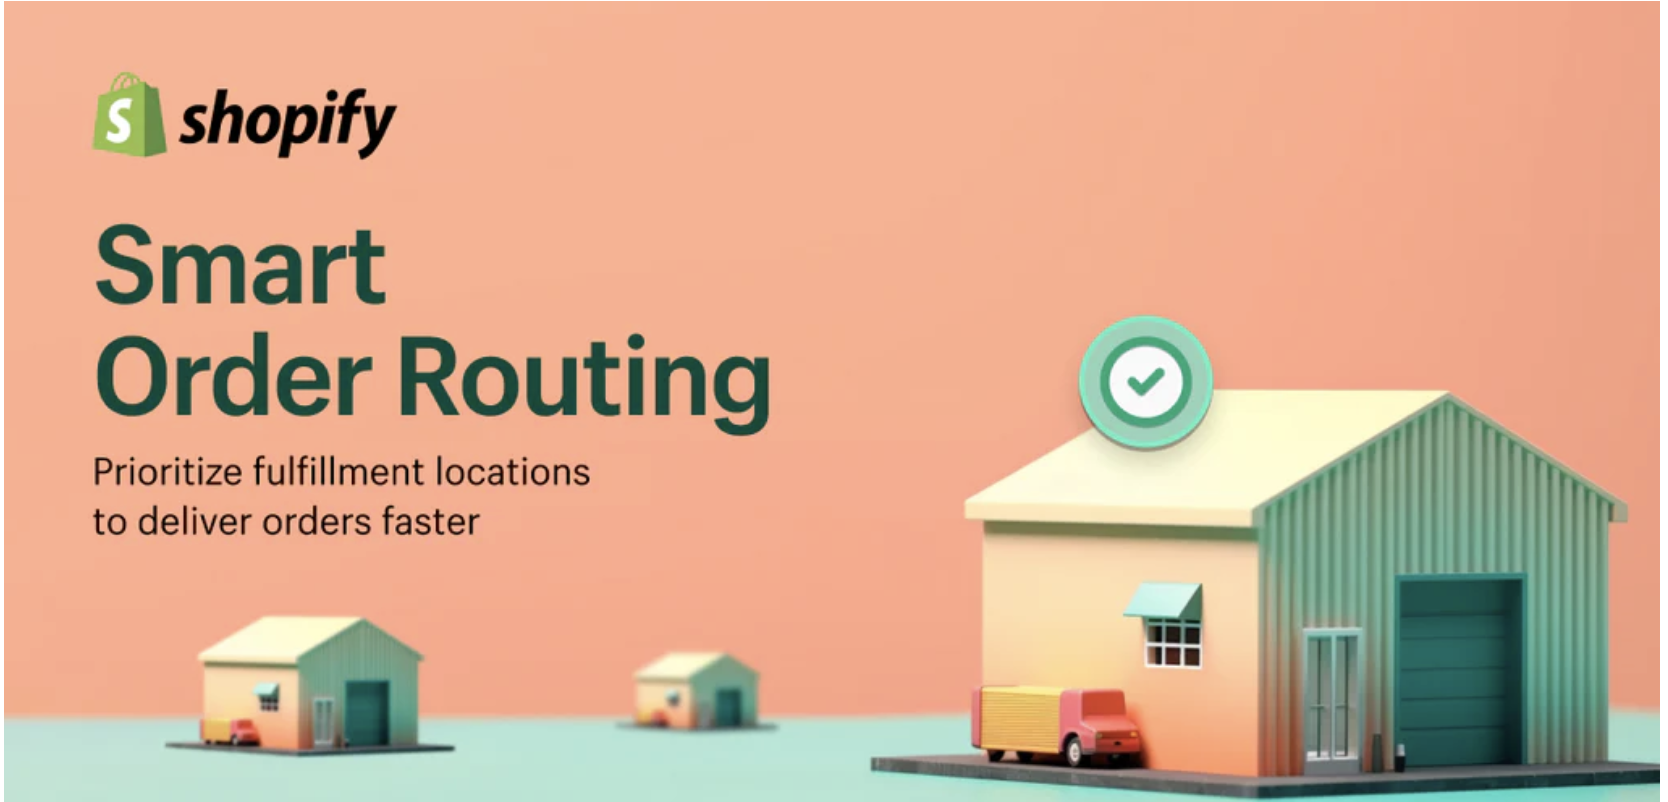 Shopify Smart Order Routing